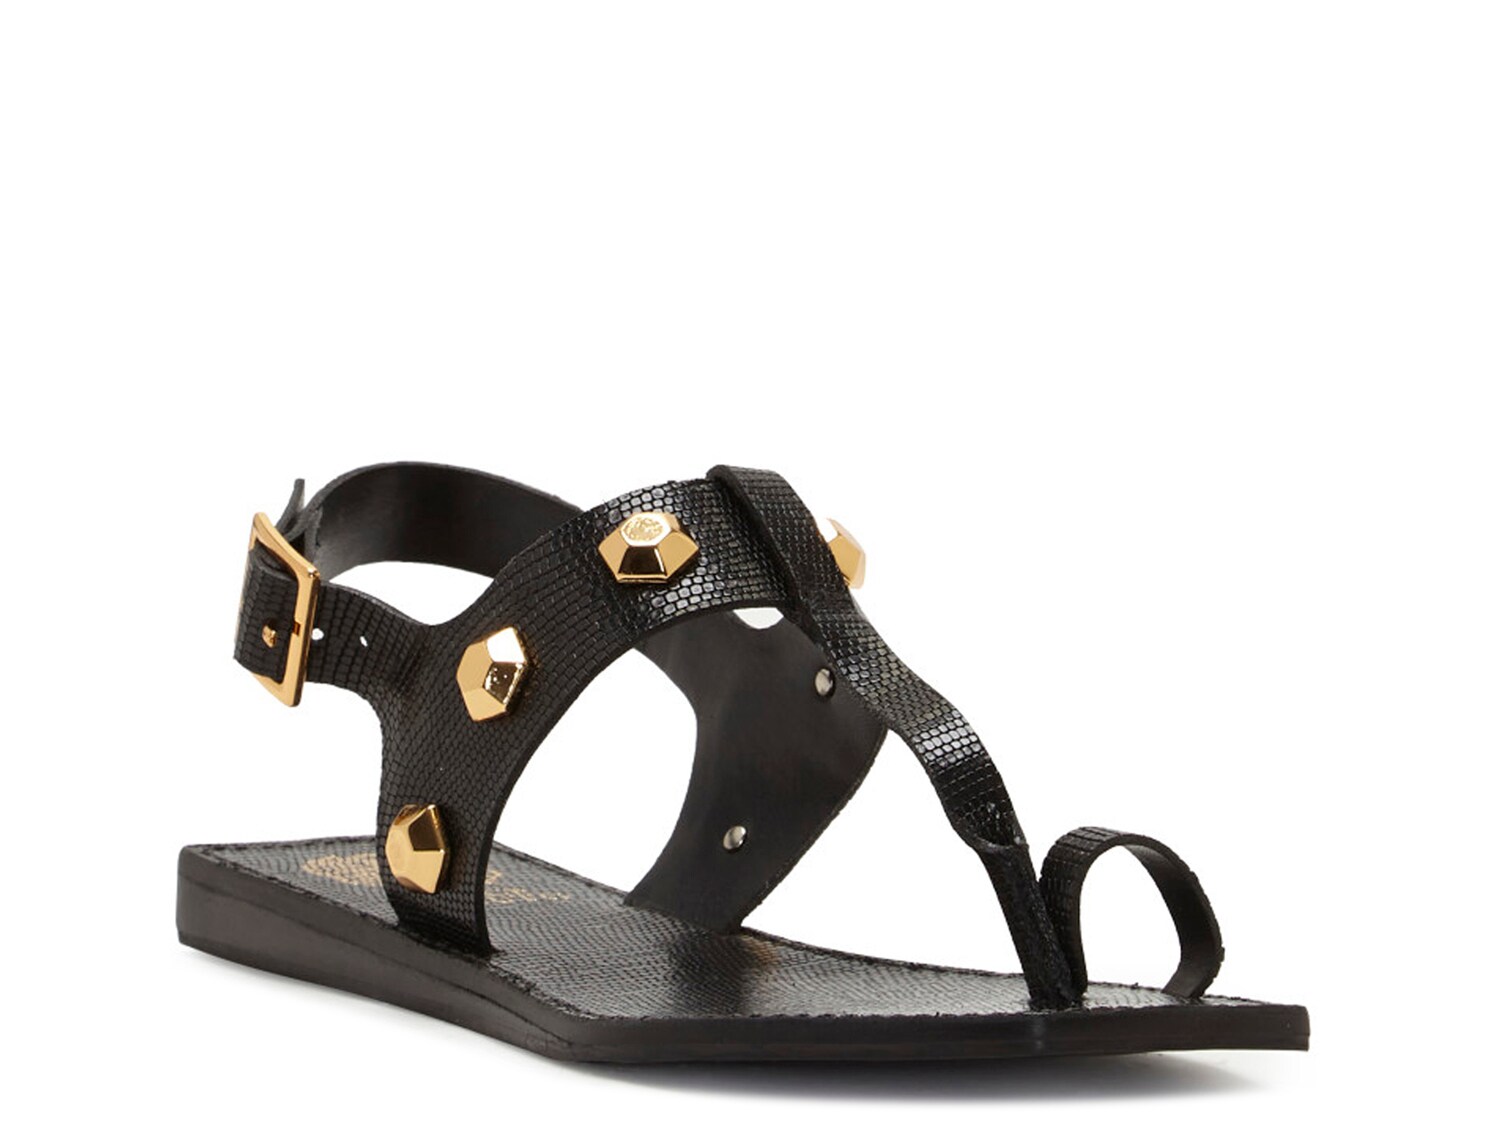 Vince Camuto Dailette Sandal - Free Shipping | DSW